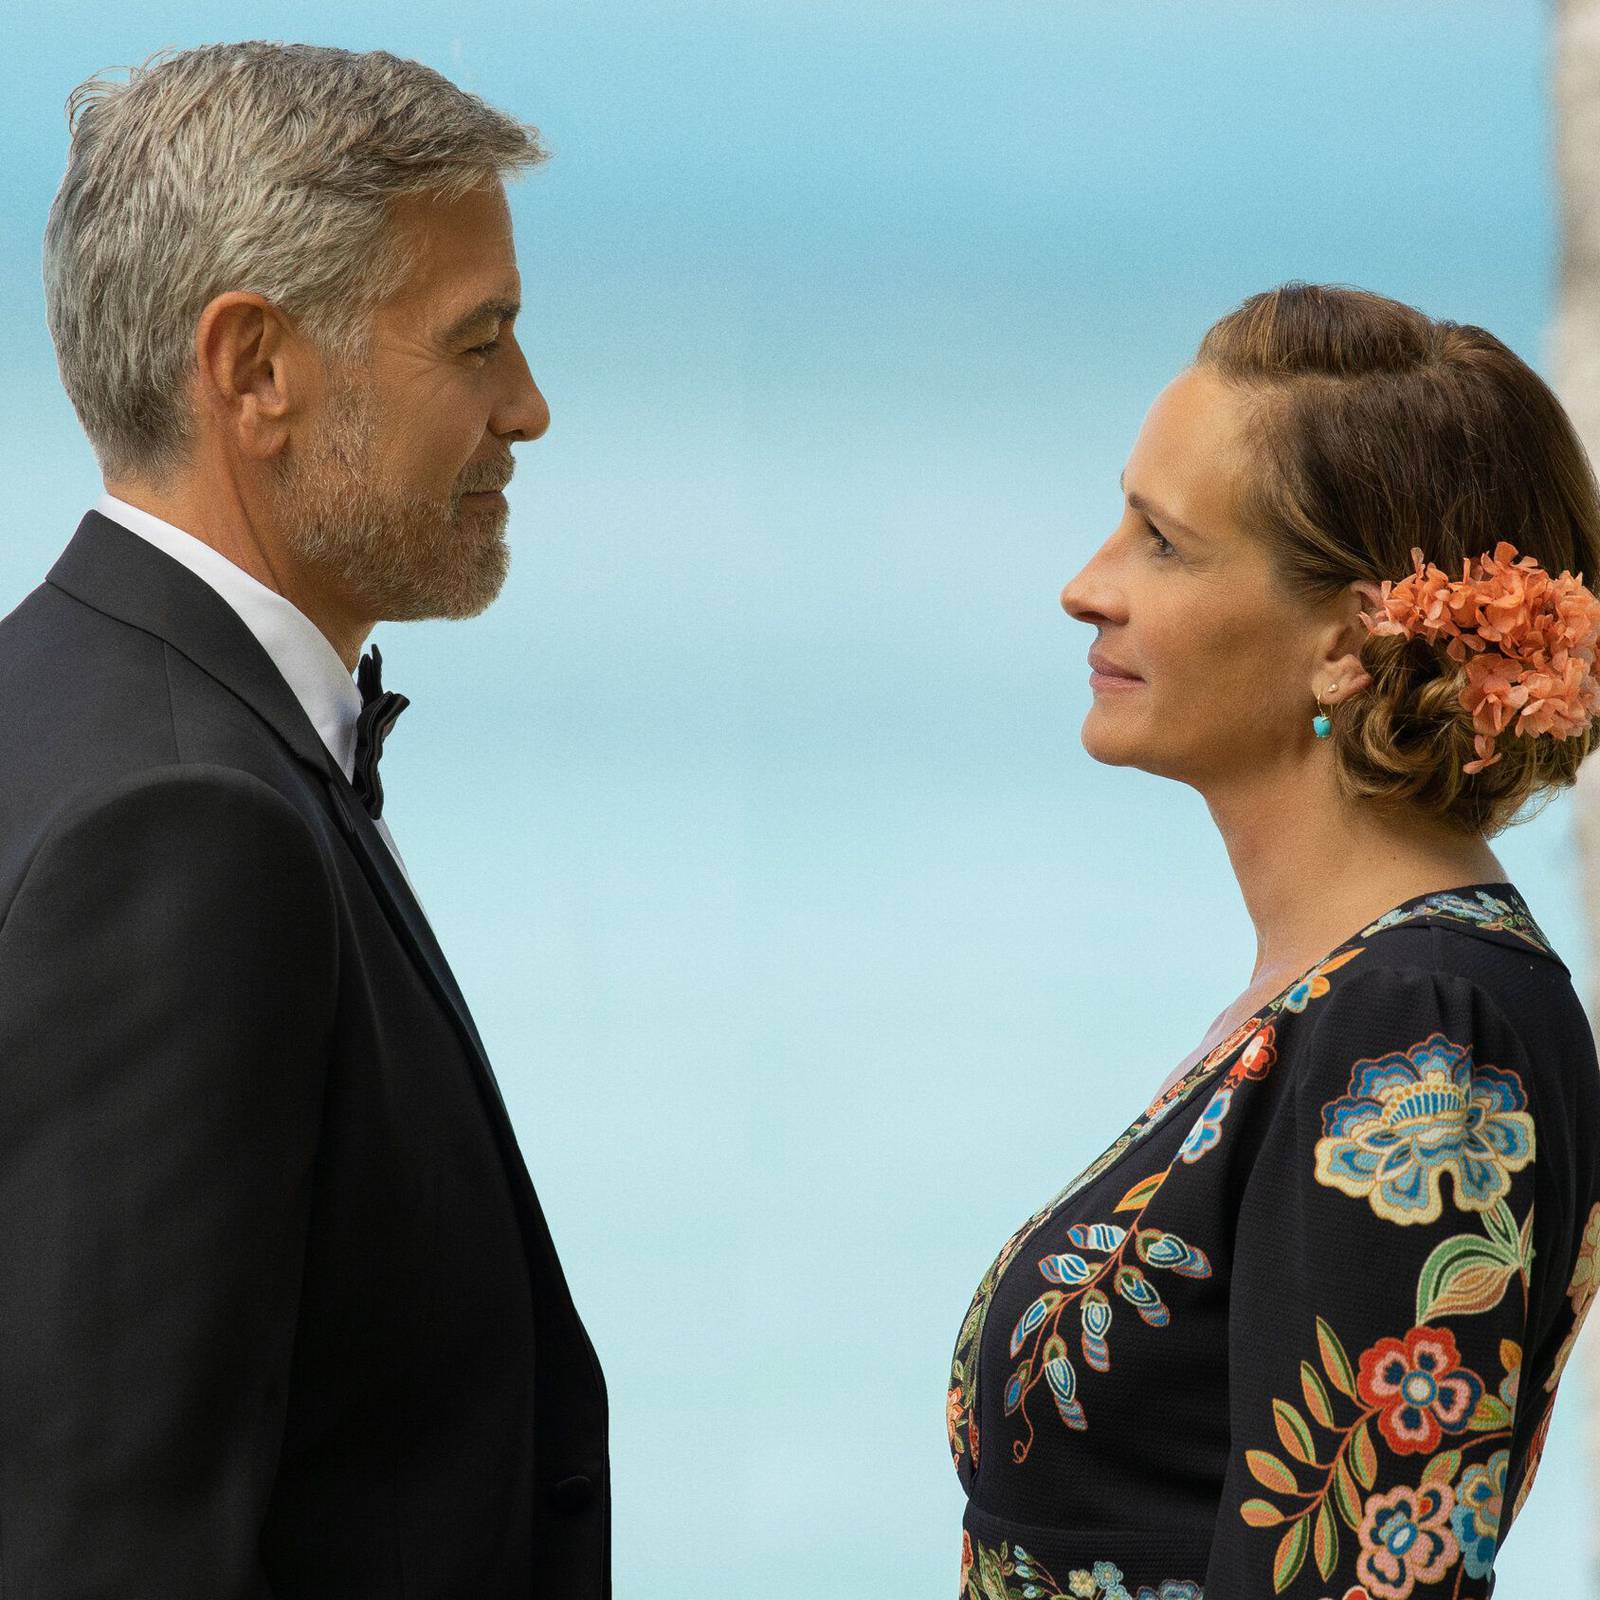 Julia Roberts, George Clooney rom-com 'Ticket to Paradise' lands 2022  release date: report